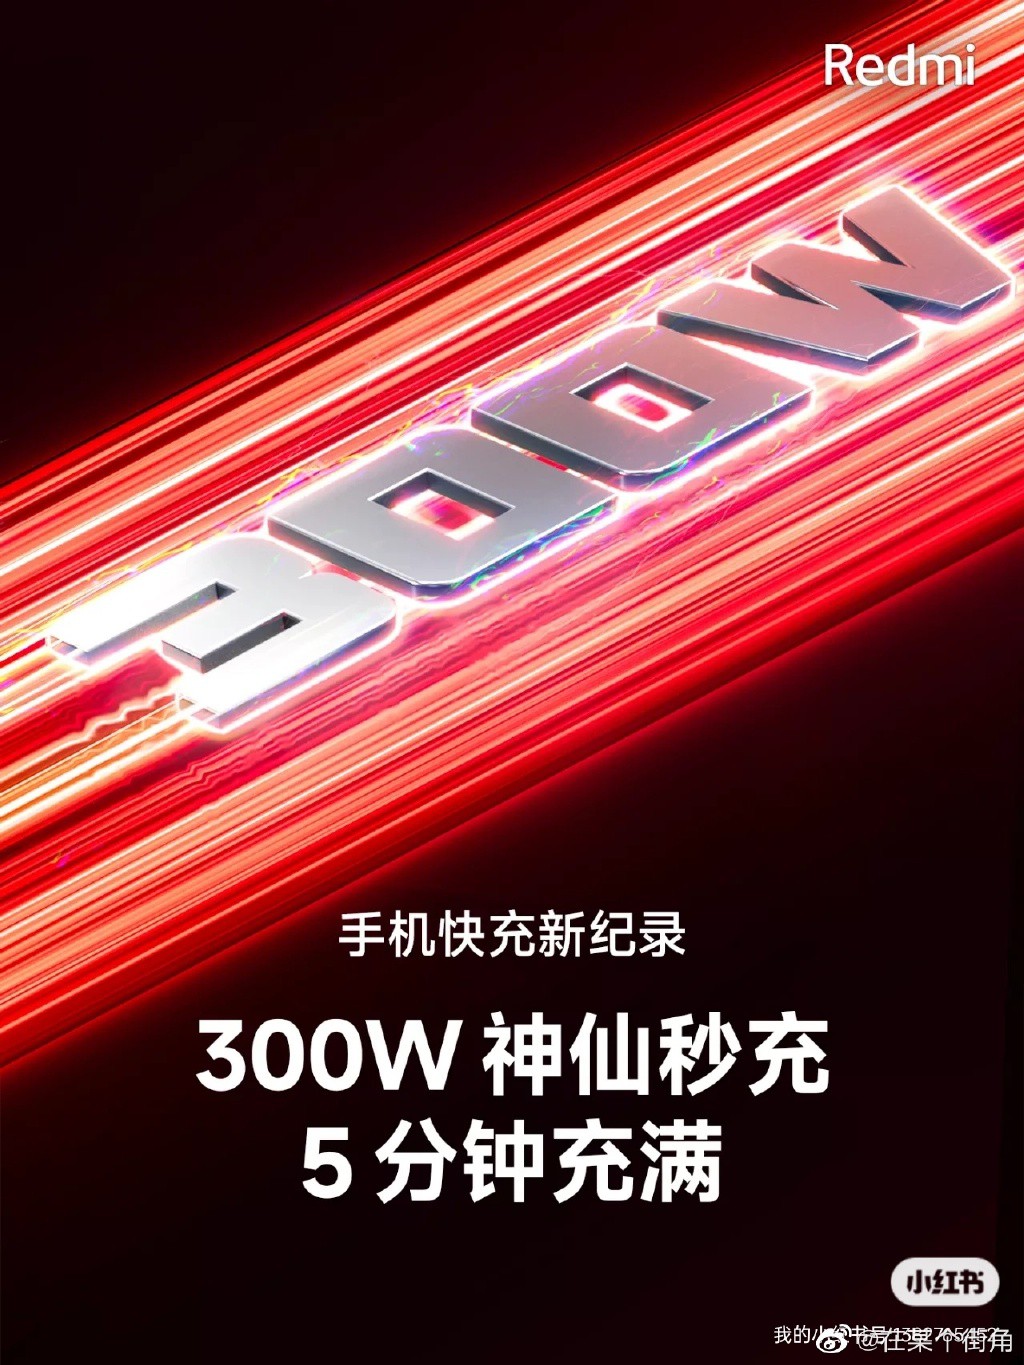 redmi-300w-charger-announced-5385242